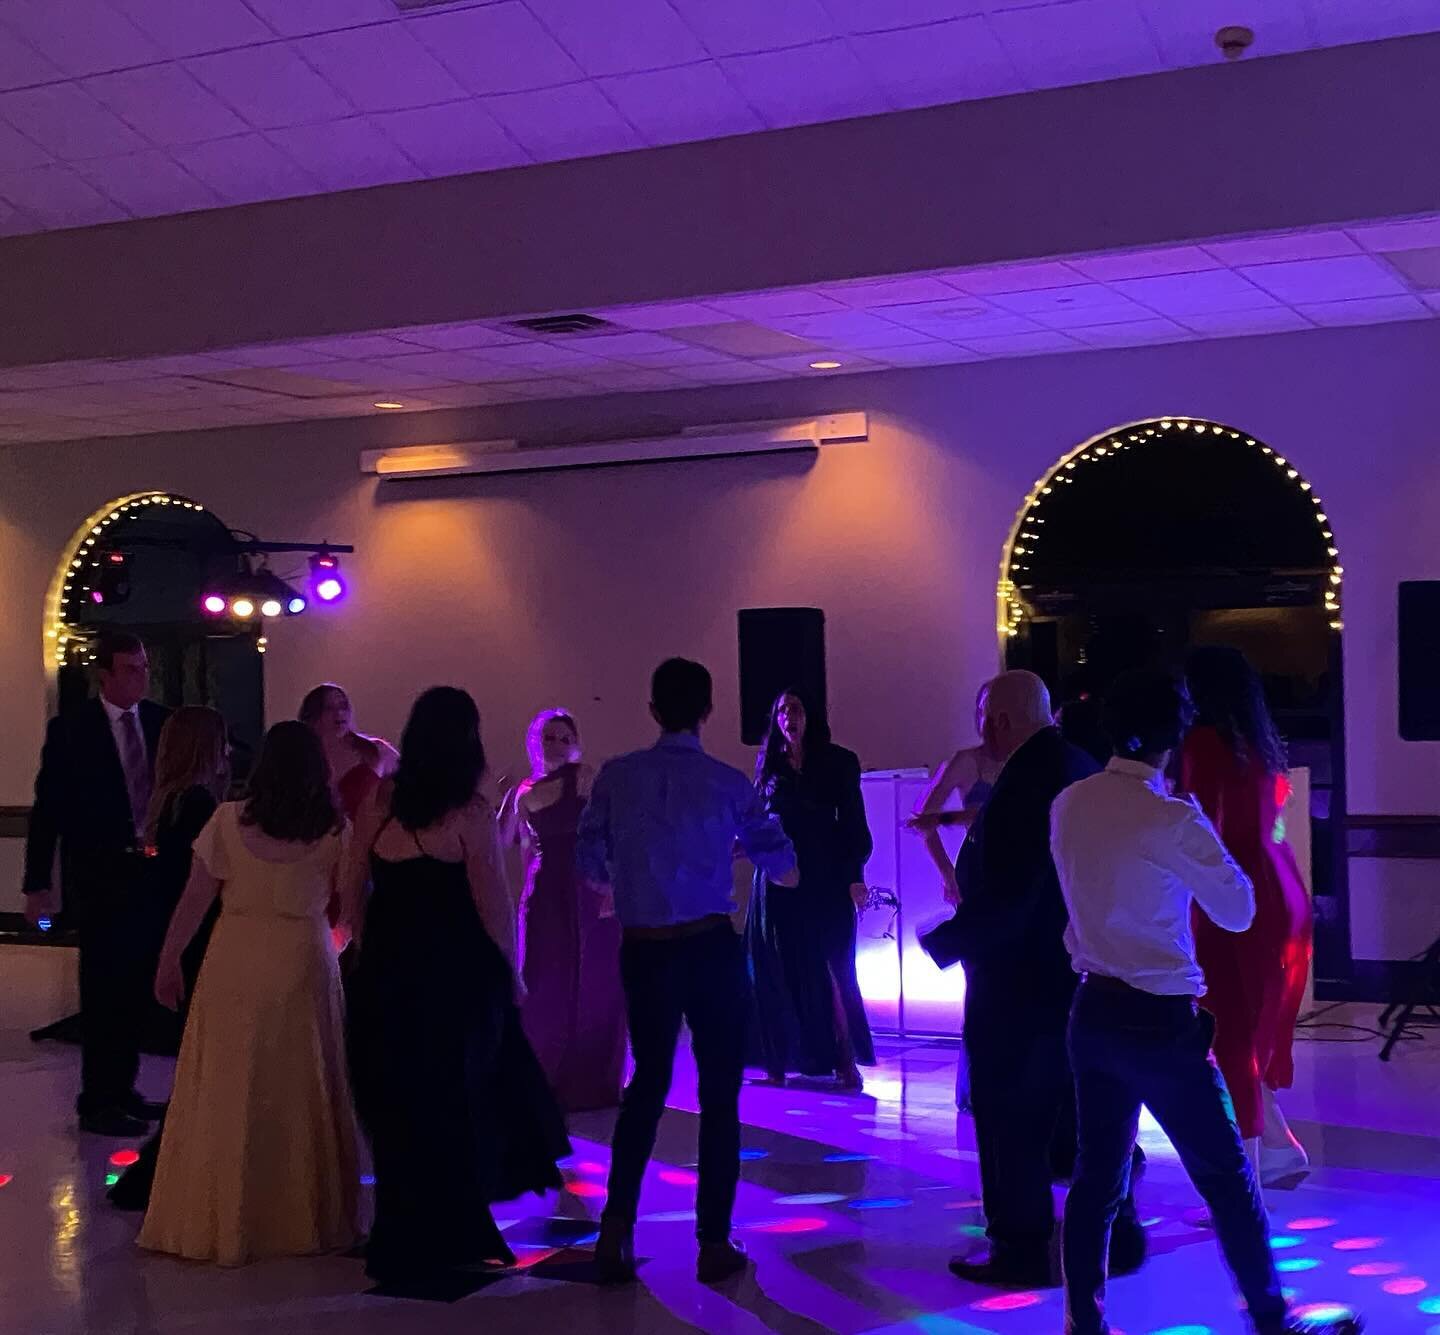 Last year&rsquo;s inaugural Masquerade Ball was a whole lot of fun for our young adults as well as those from the metro area. What&rsquo;s to say that won&rsquo;t be the case this year?🤔🕺🏻✨

If you&rsquo;re a young adult between the ages of 18 and